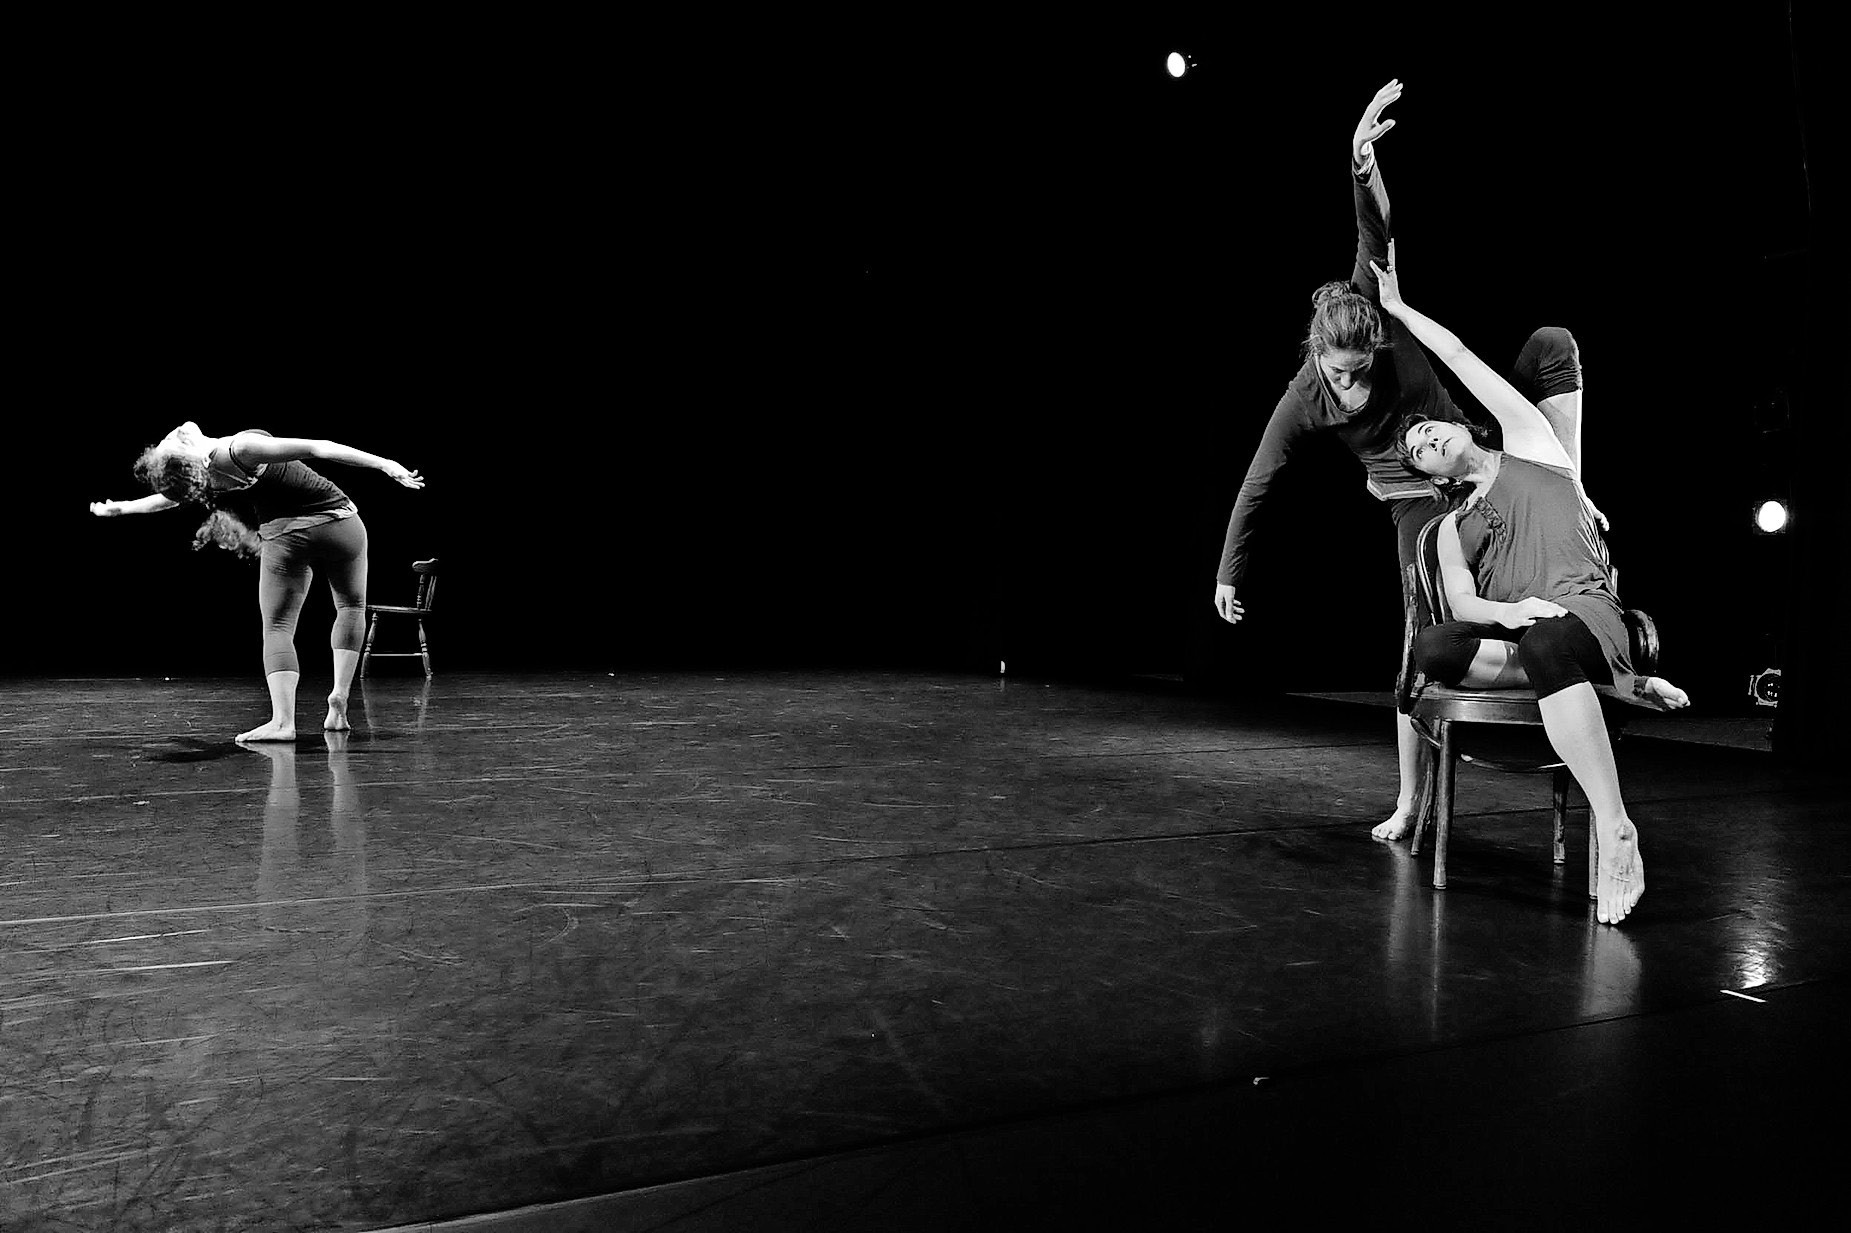 3 dancers moving on a stage, 2 are close together, 1 far away. Black and white image. 